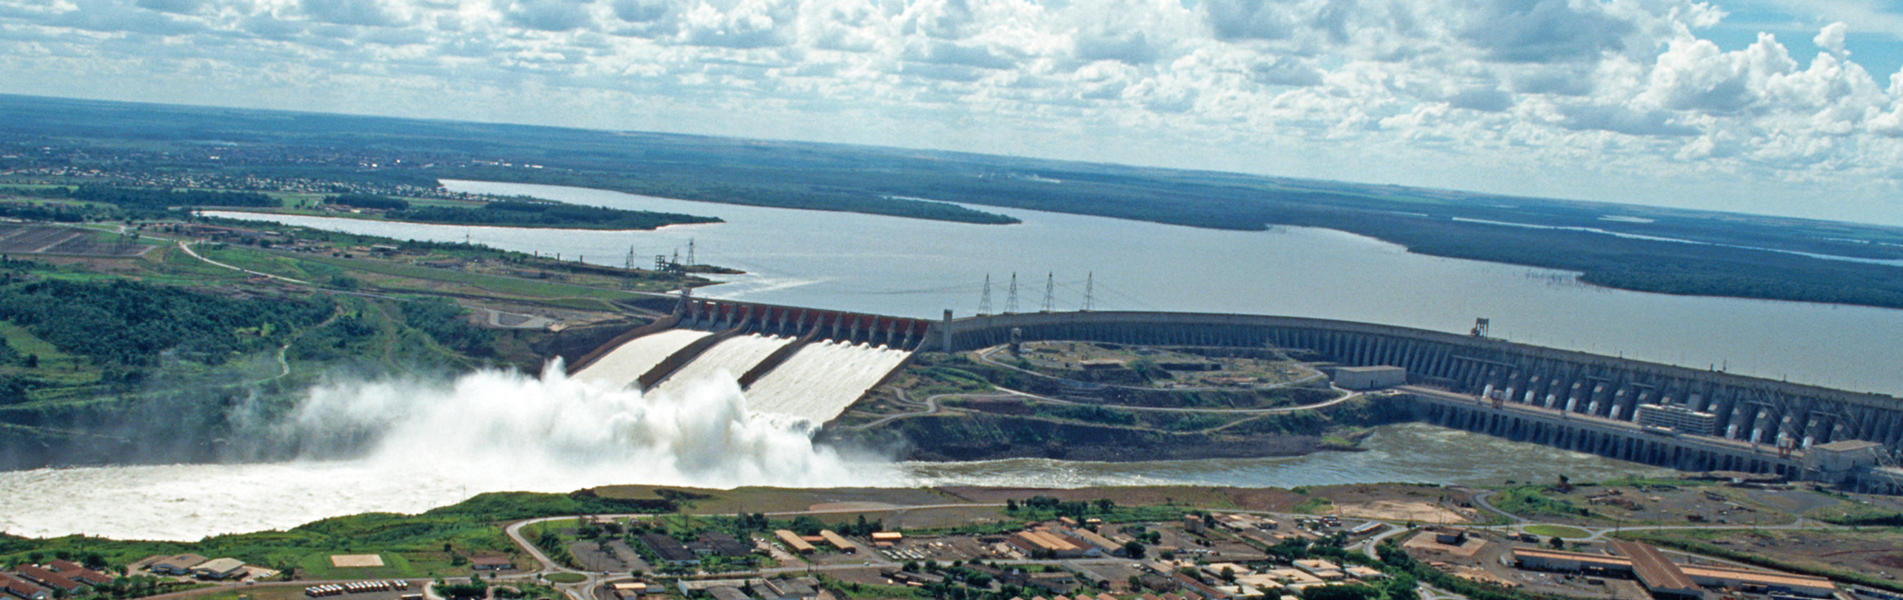 Aerial view of Itaipu, one of the world’s largest hydroelectric dams.